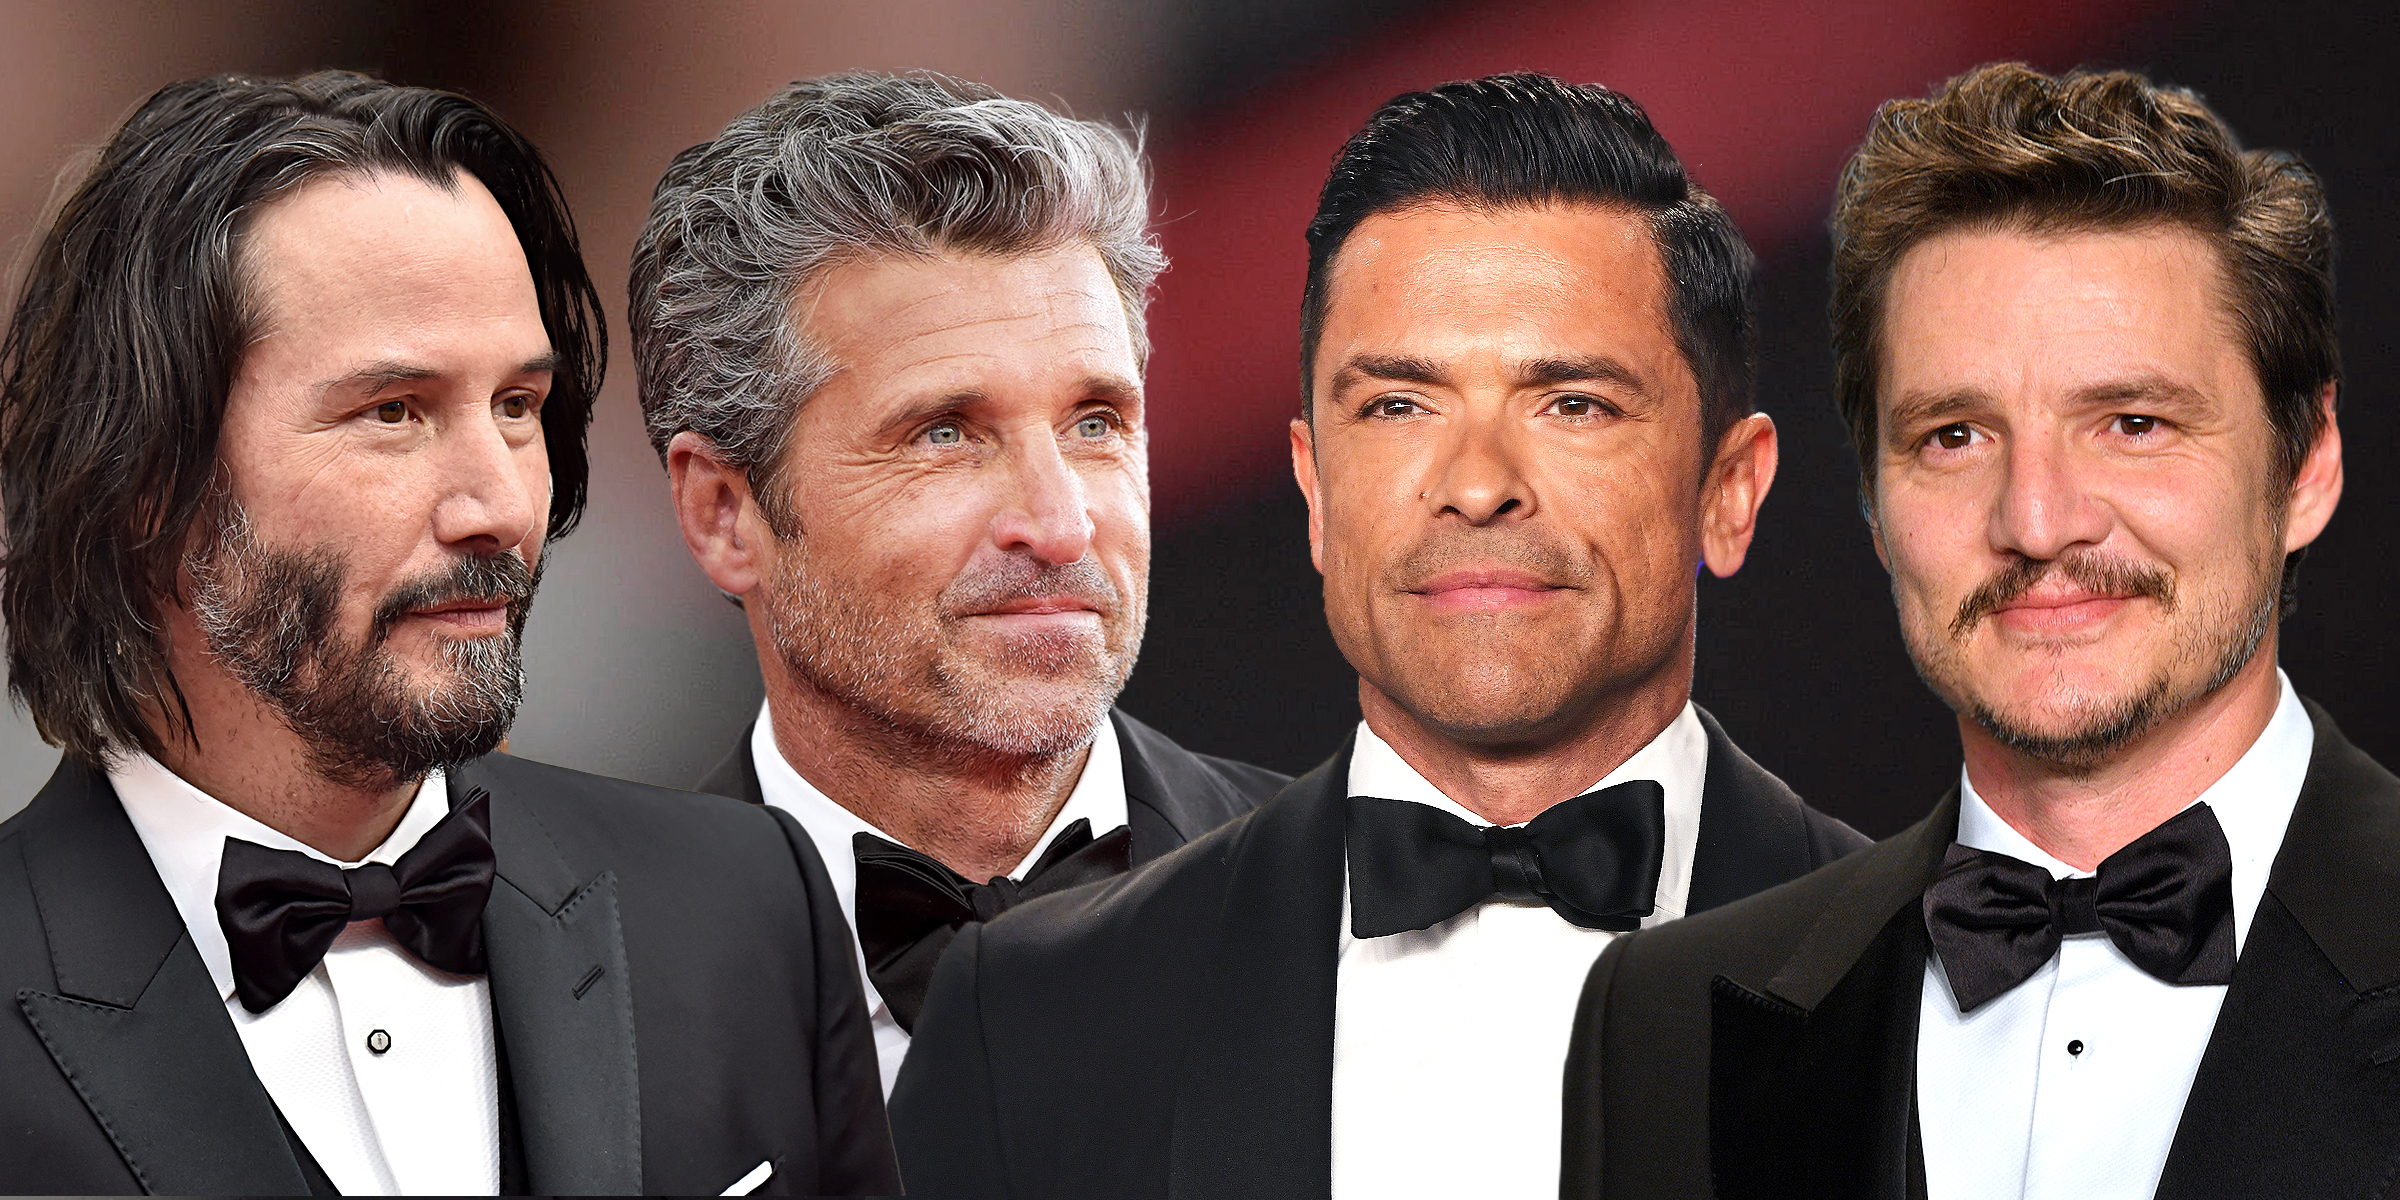 Keanu Reeves, Patrick Dempsey, Mark Consuelos und Pedro Pascal | Quelle: Getty Images